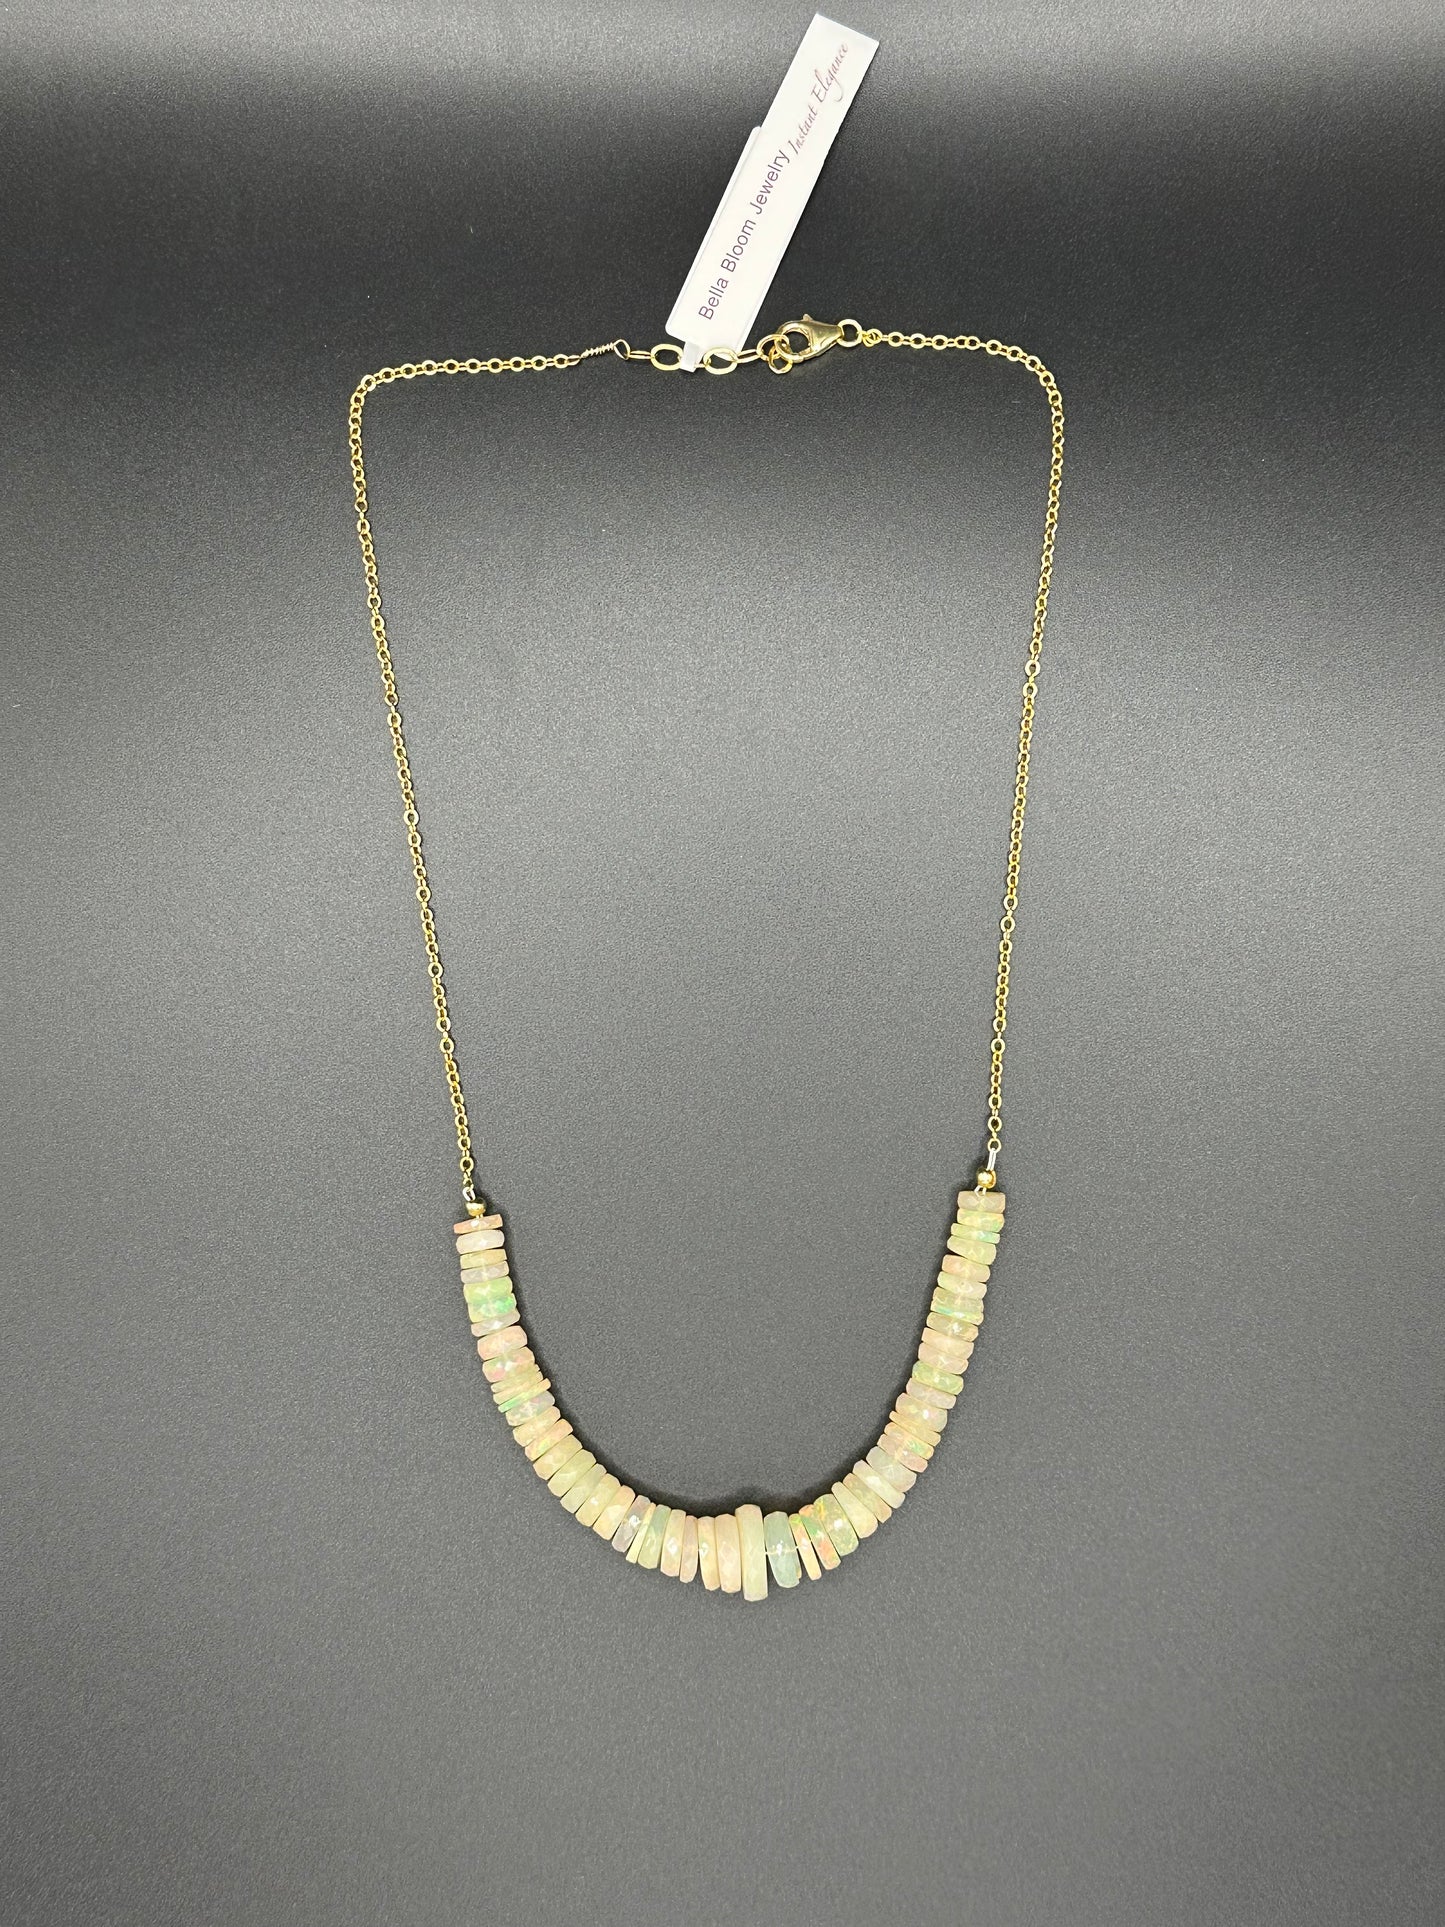 Bella Bloom Necklace - Stunning Opals on 18" 14K Gold Fill Chain